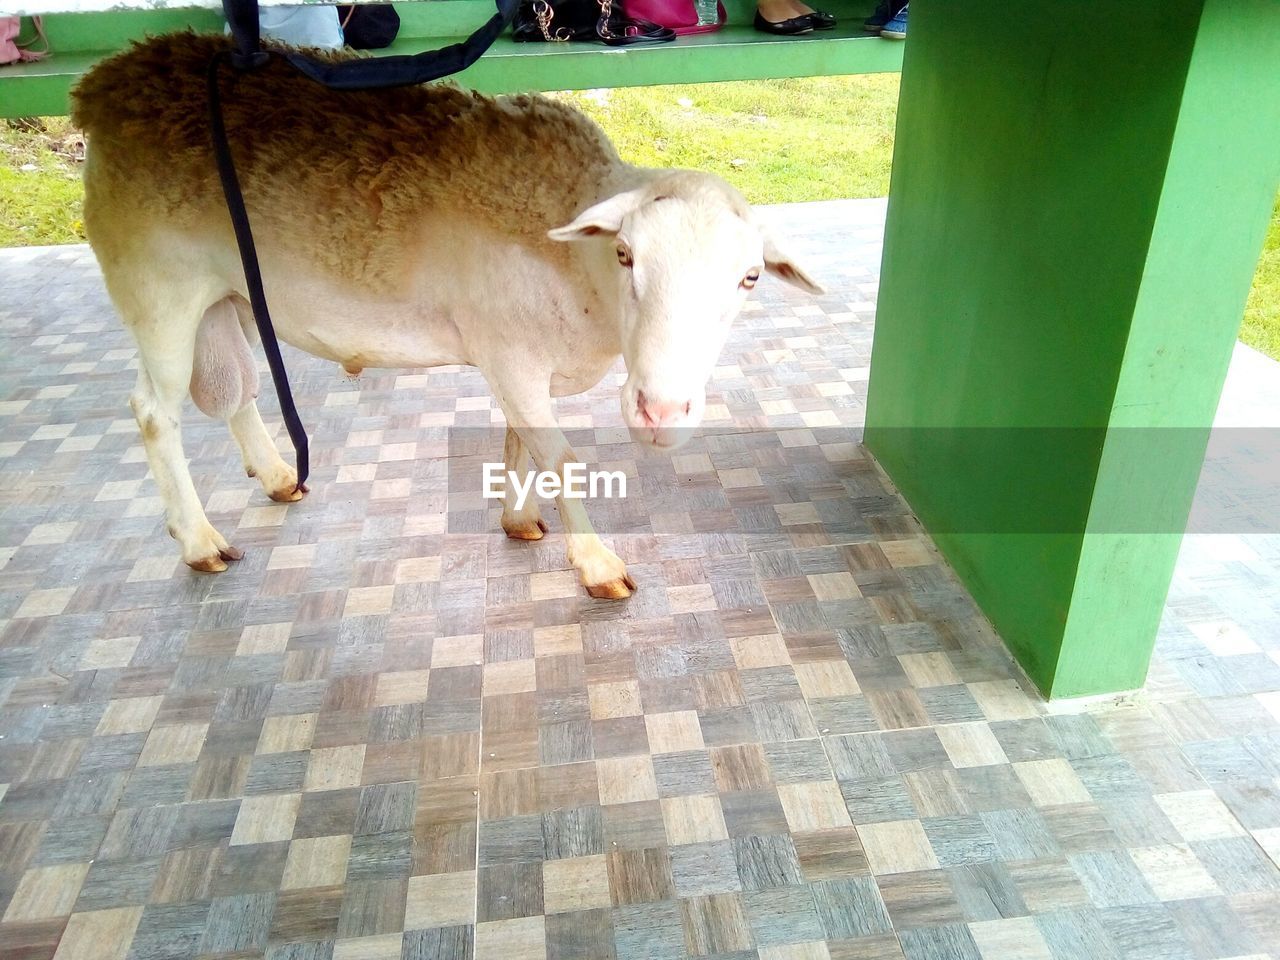 COWS STANDING IN ZOO